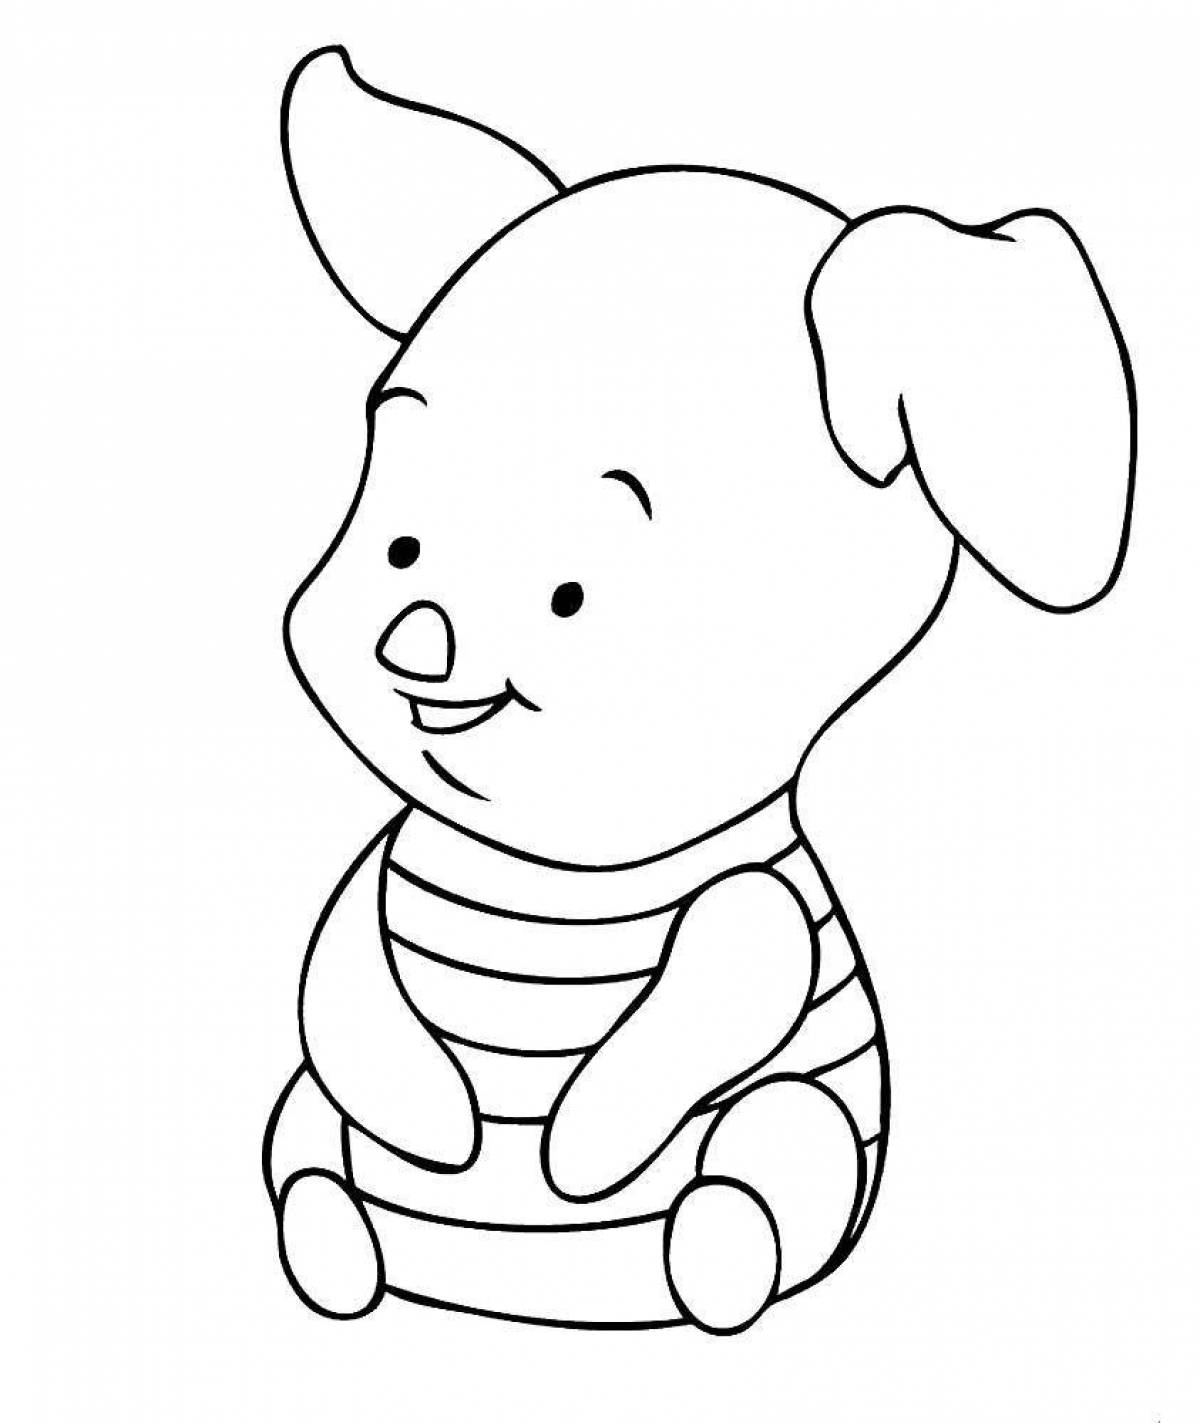 Blessed pig coloring page